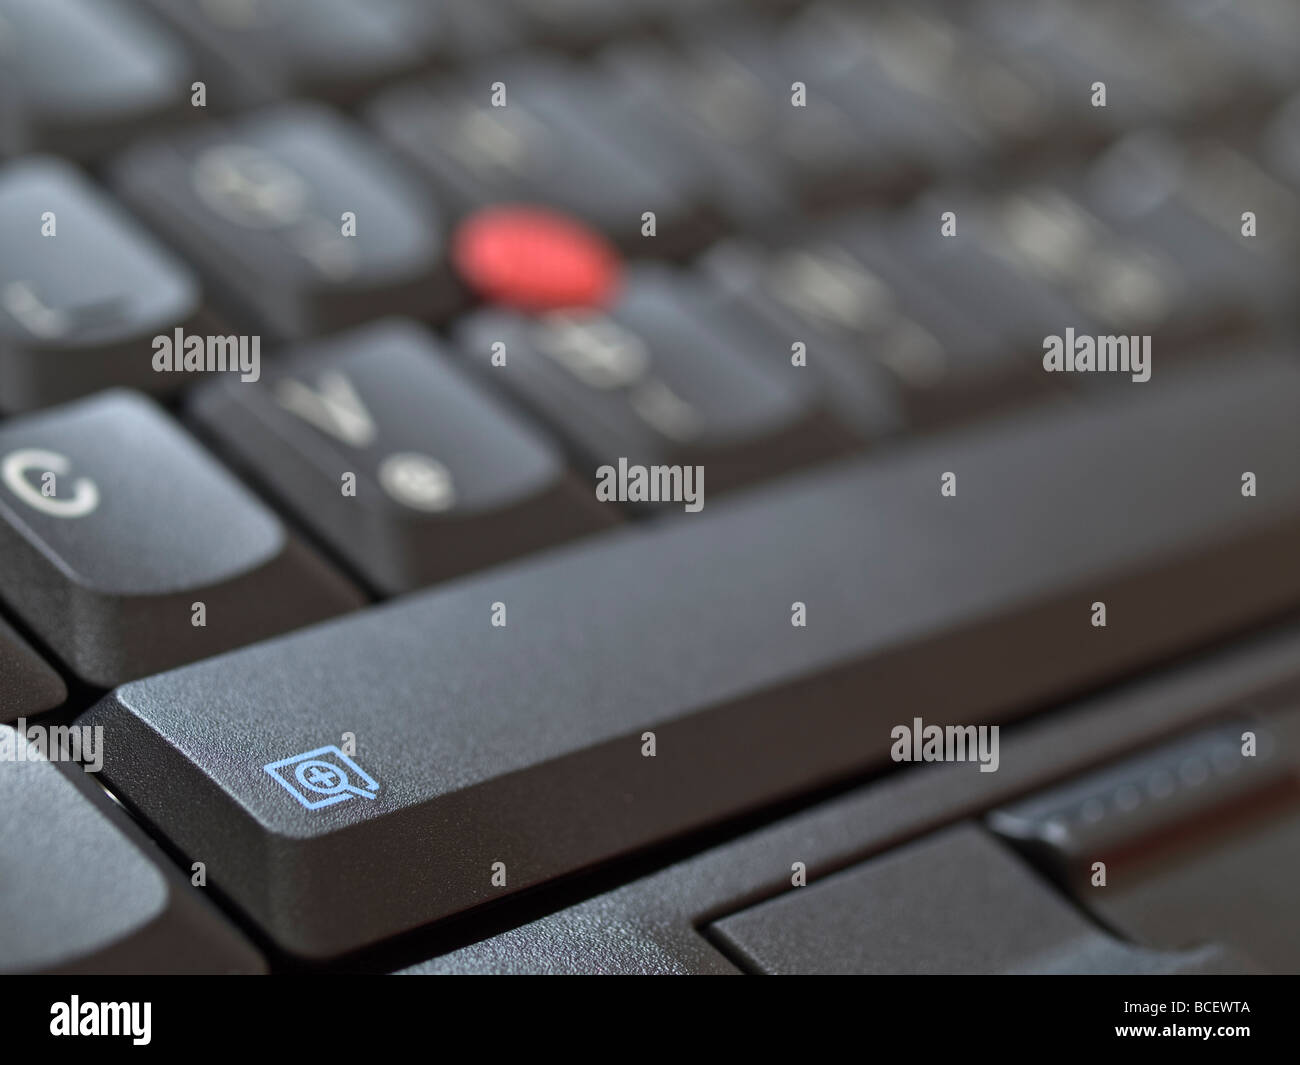 Page 3 - V Keyboard High Resolution Stock Photography and Images - Alamy